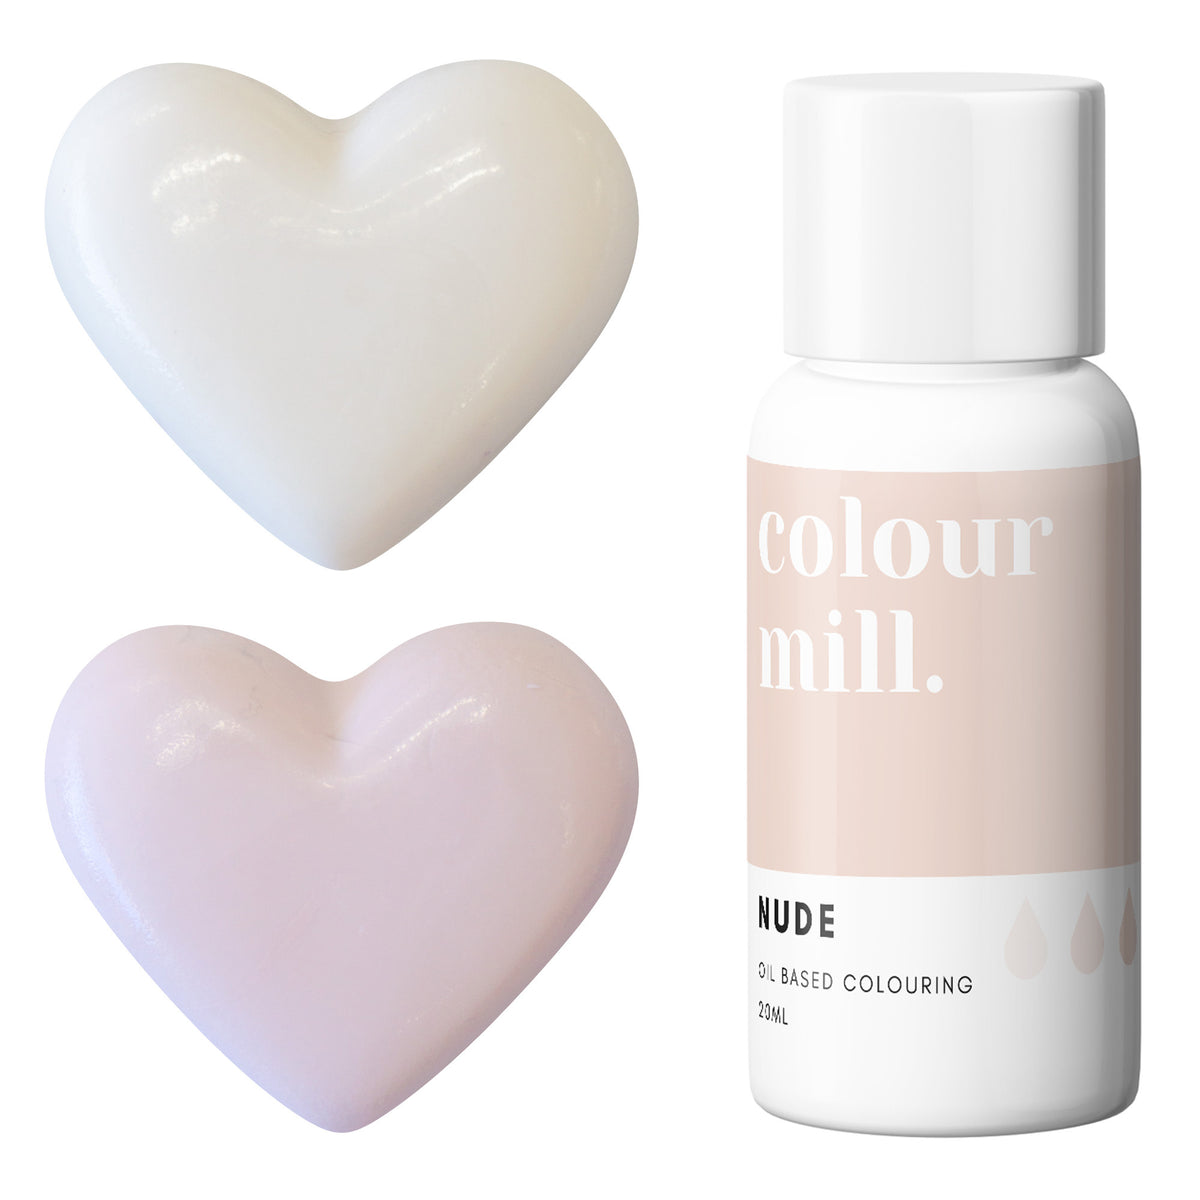 Nude Colour Mill Oil Based Food Coloring